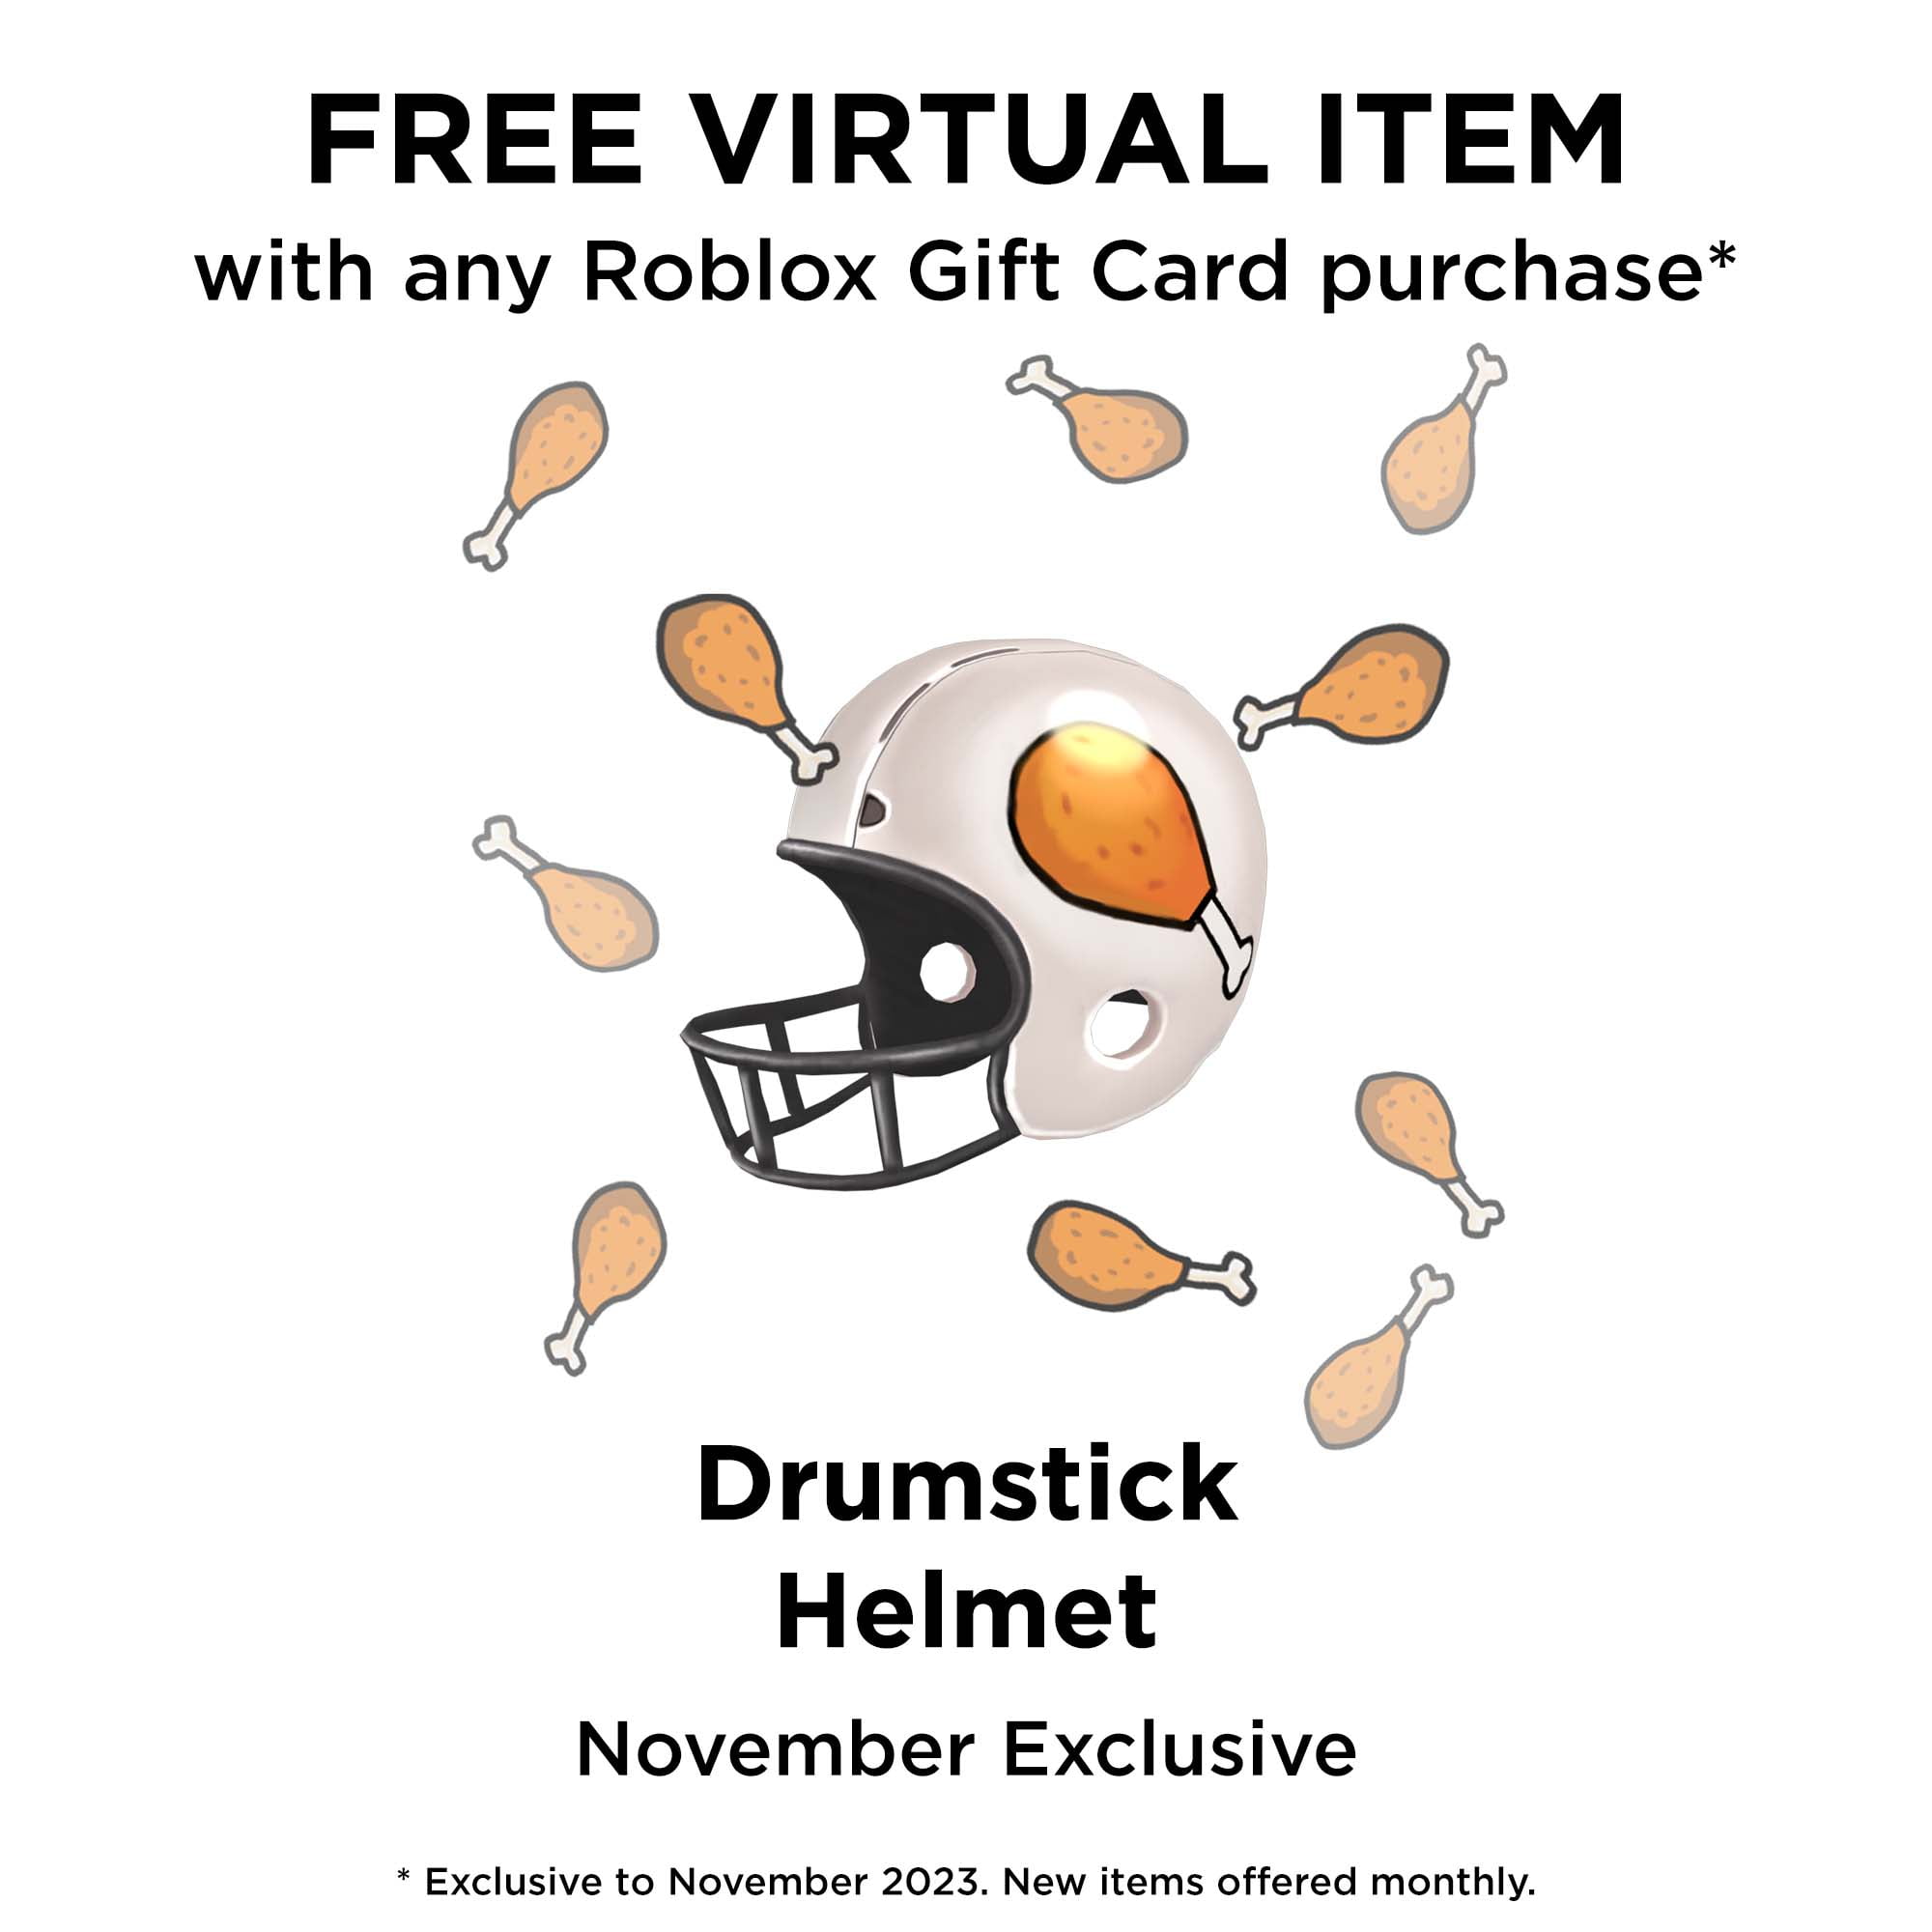 Roblox $100 Gift Card Digital Download, Includes Exclusive Virtual Item